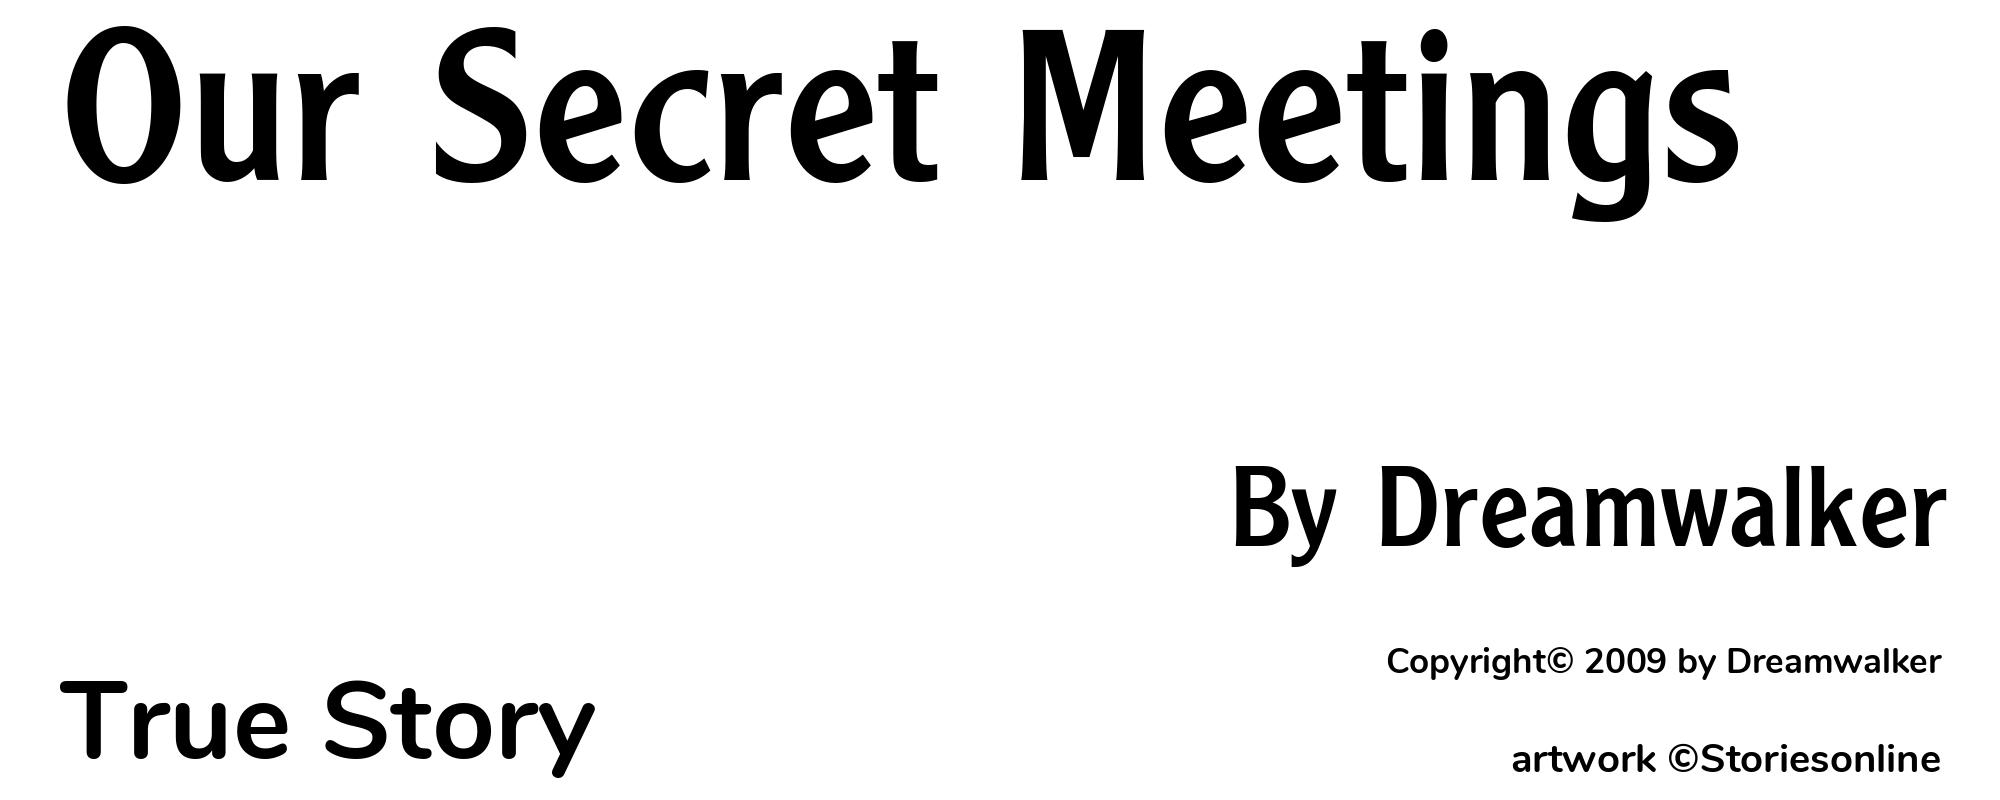 Our Secret Meetings - Cover